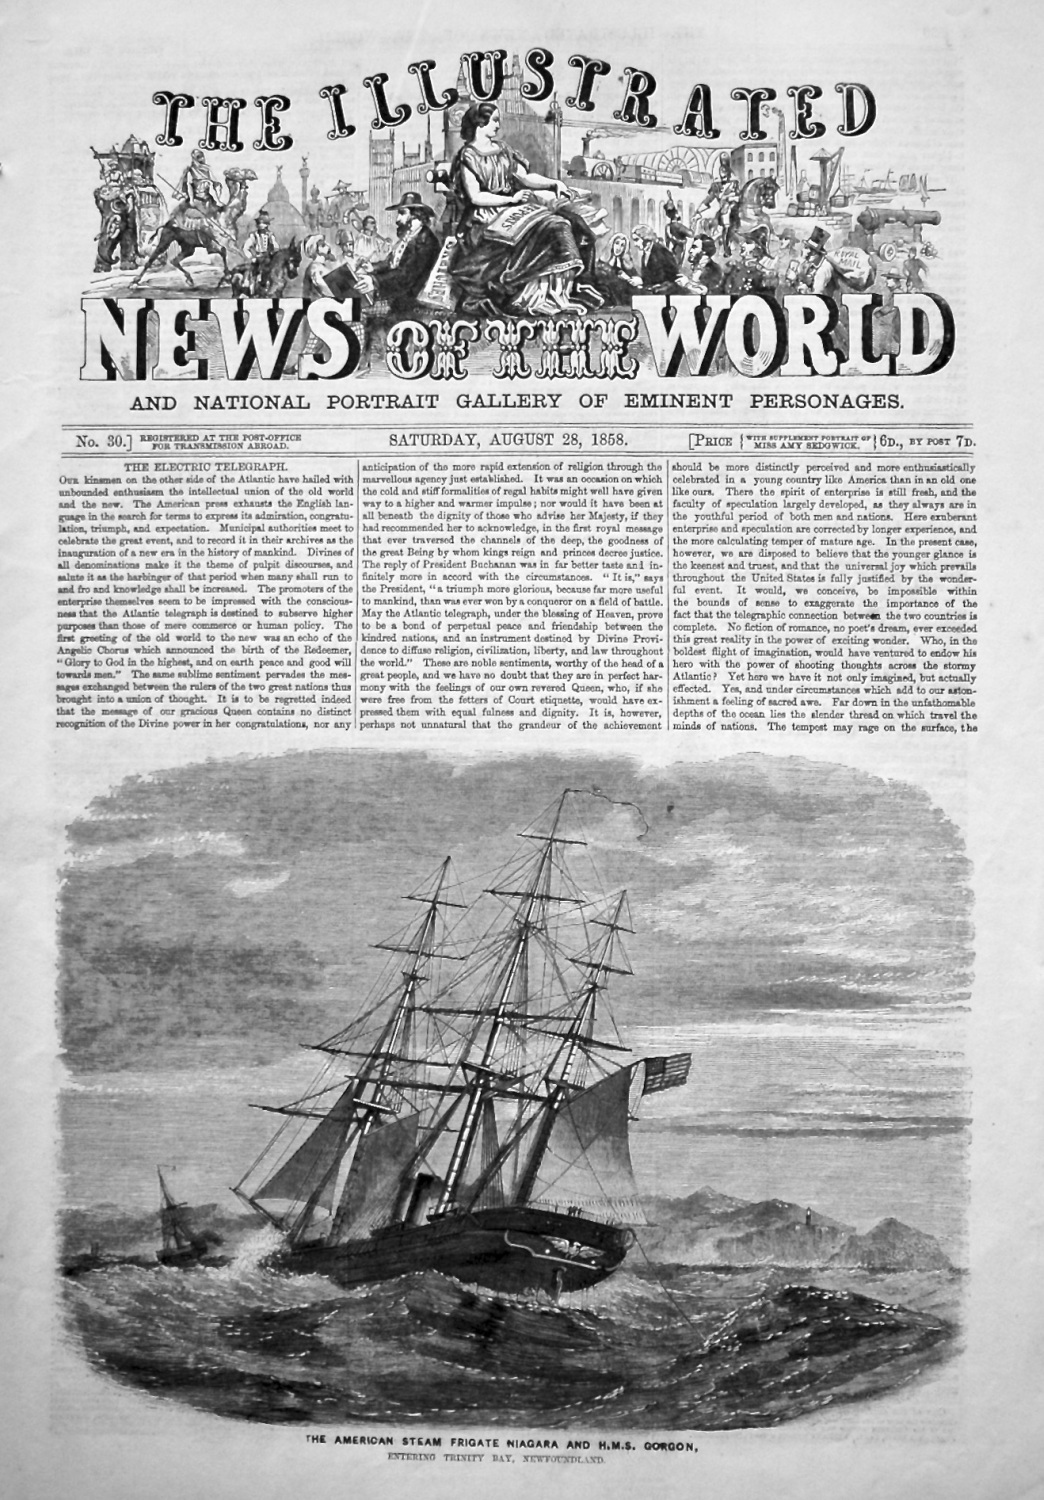 The Illustrated News of the World, August 28th, 1858.